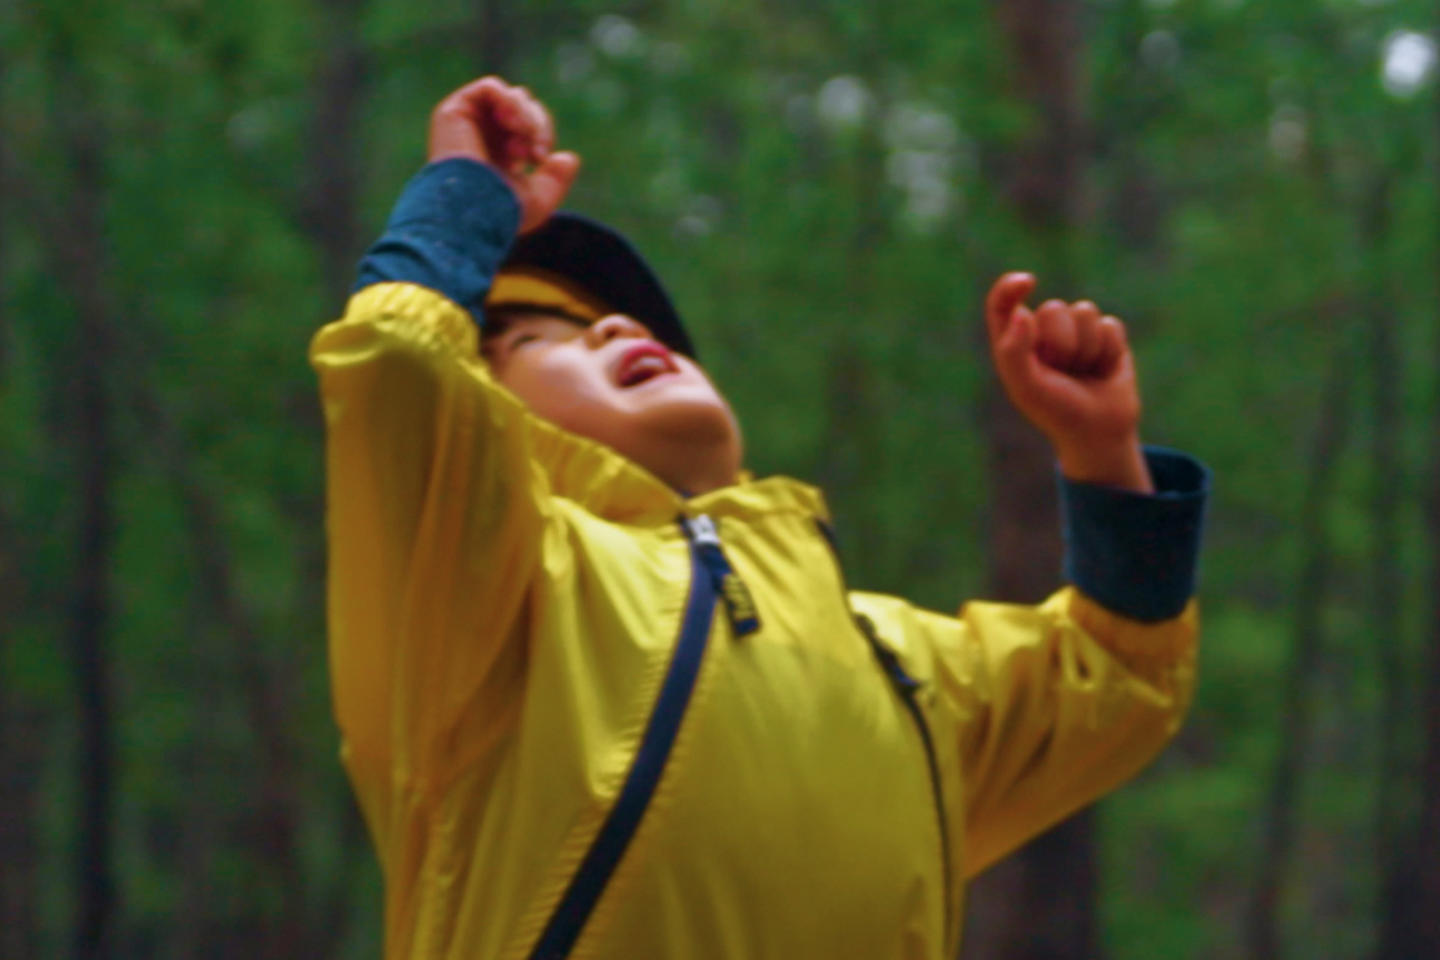 A child in a yellow windbreaker looks up at the sky